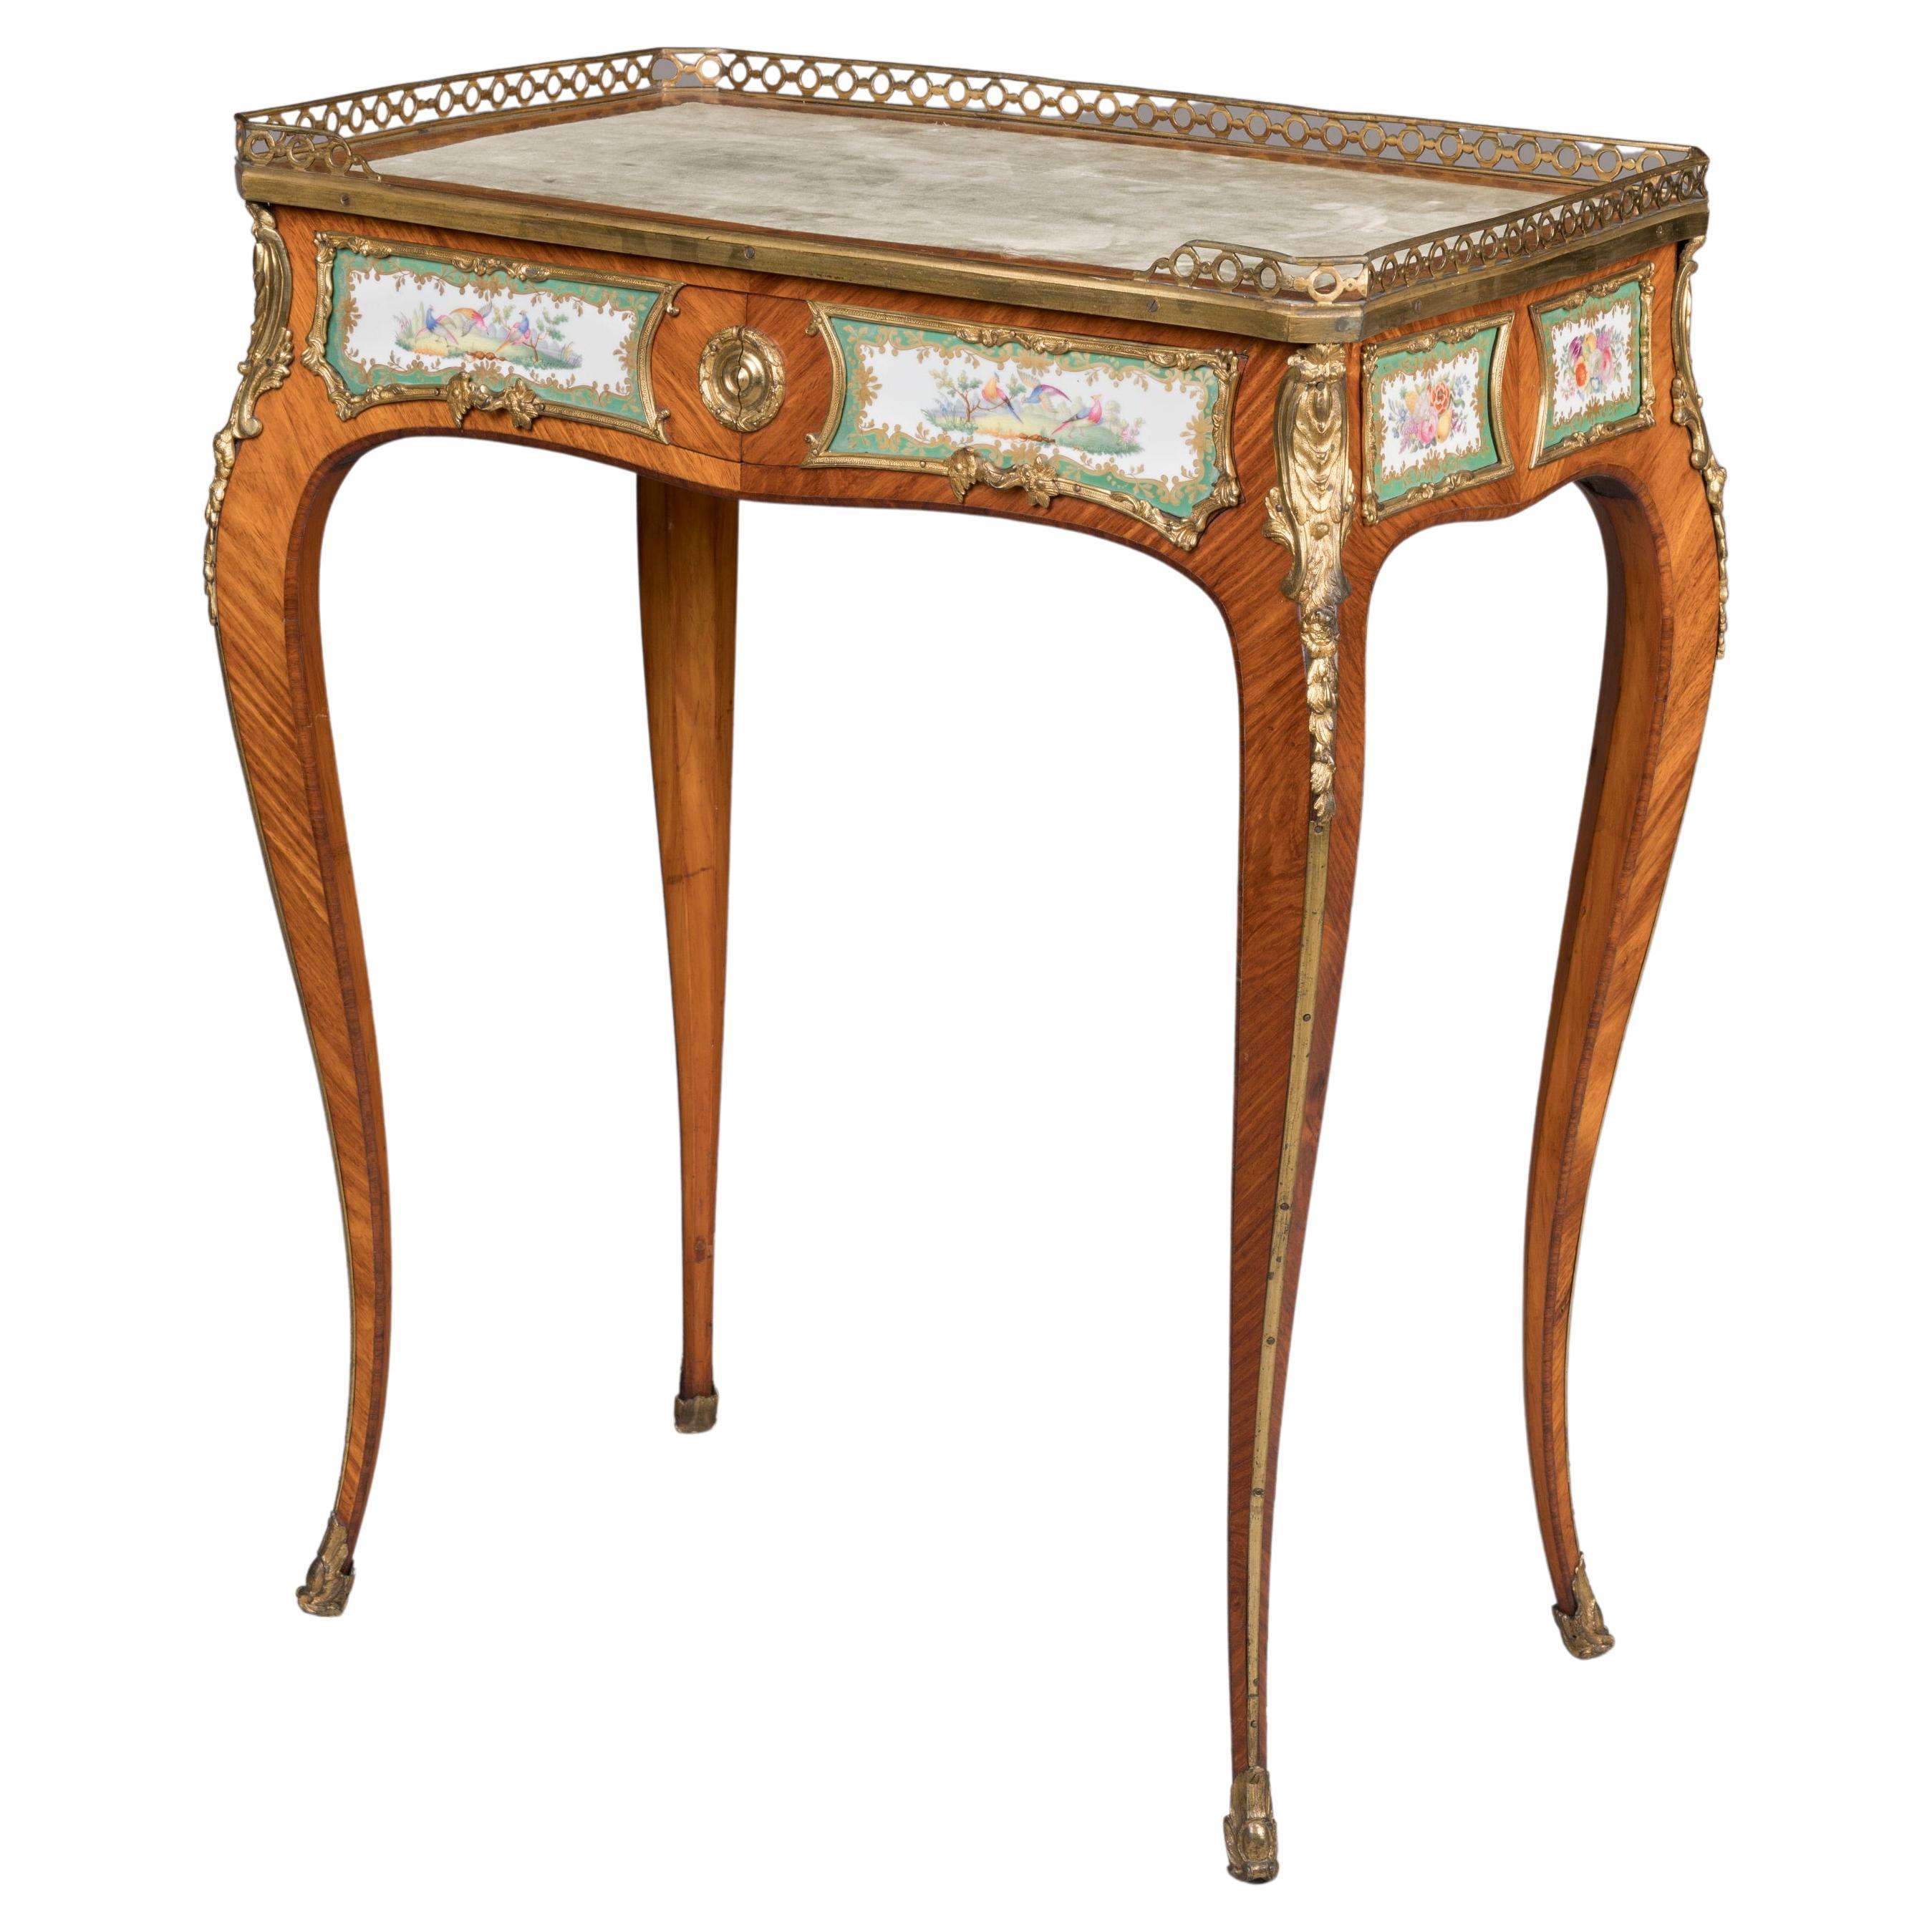 19th Century French Porcelain-Mounted Occasional Table in the Louis XV/XVI Style For Sale